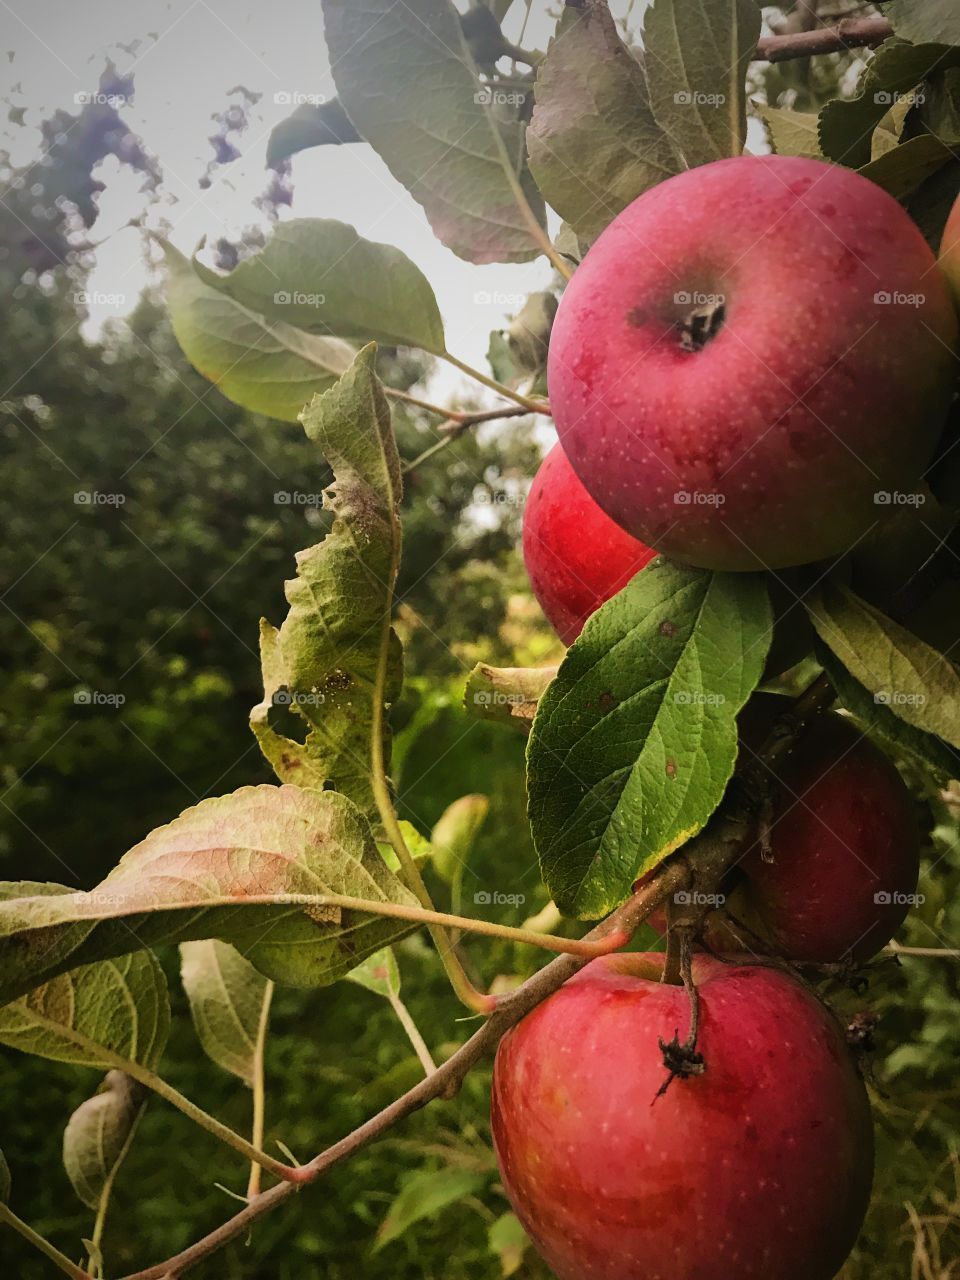 family’s apple orchard 